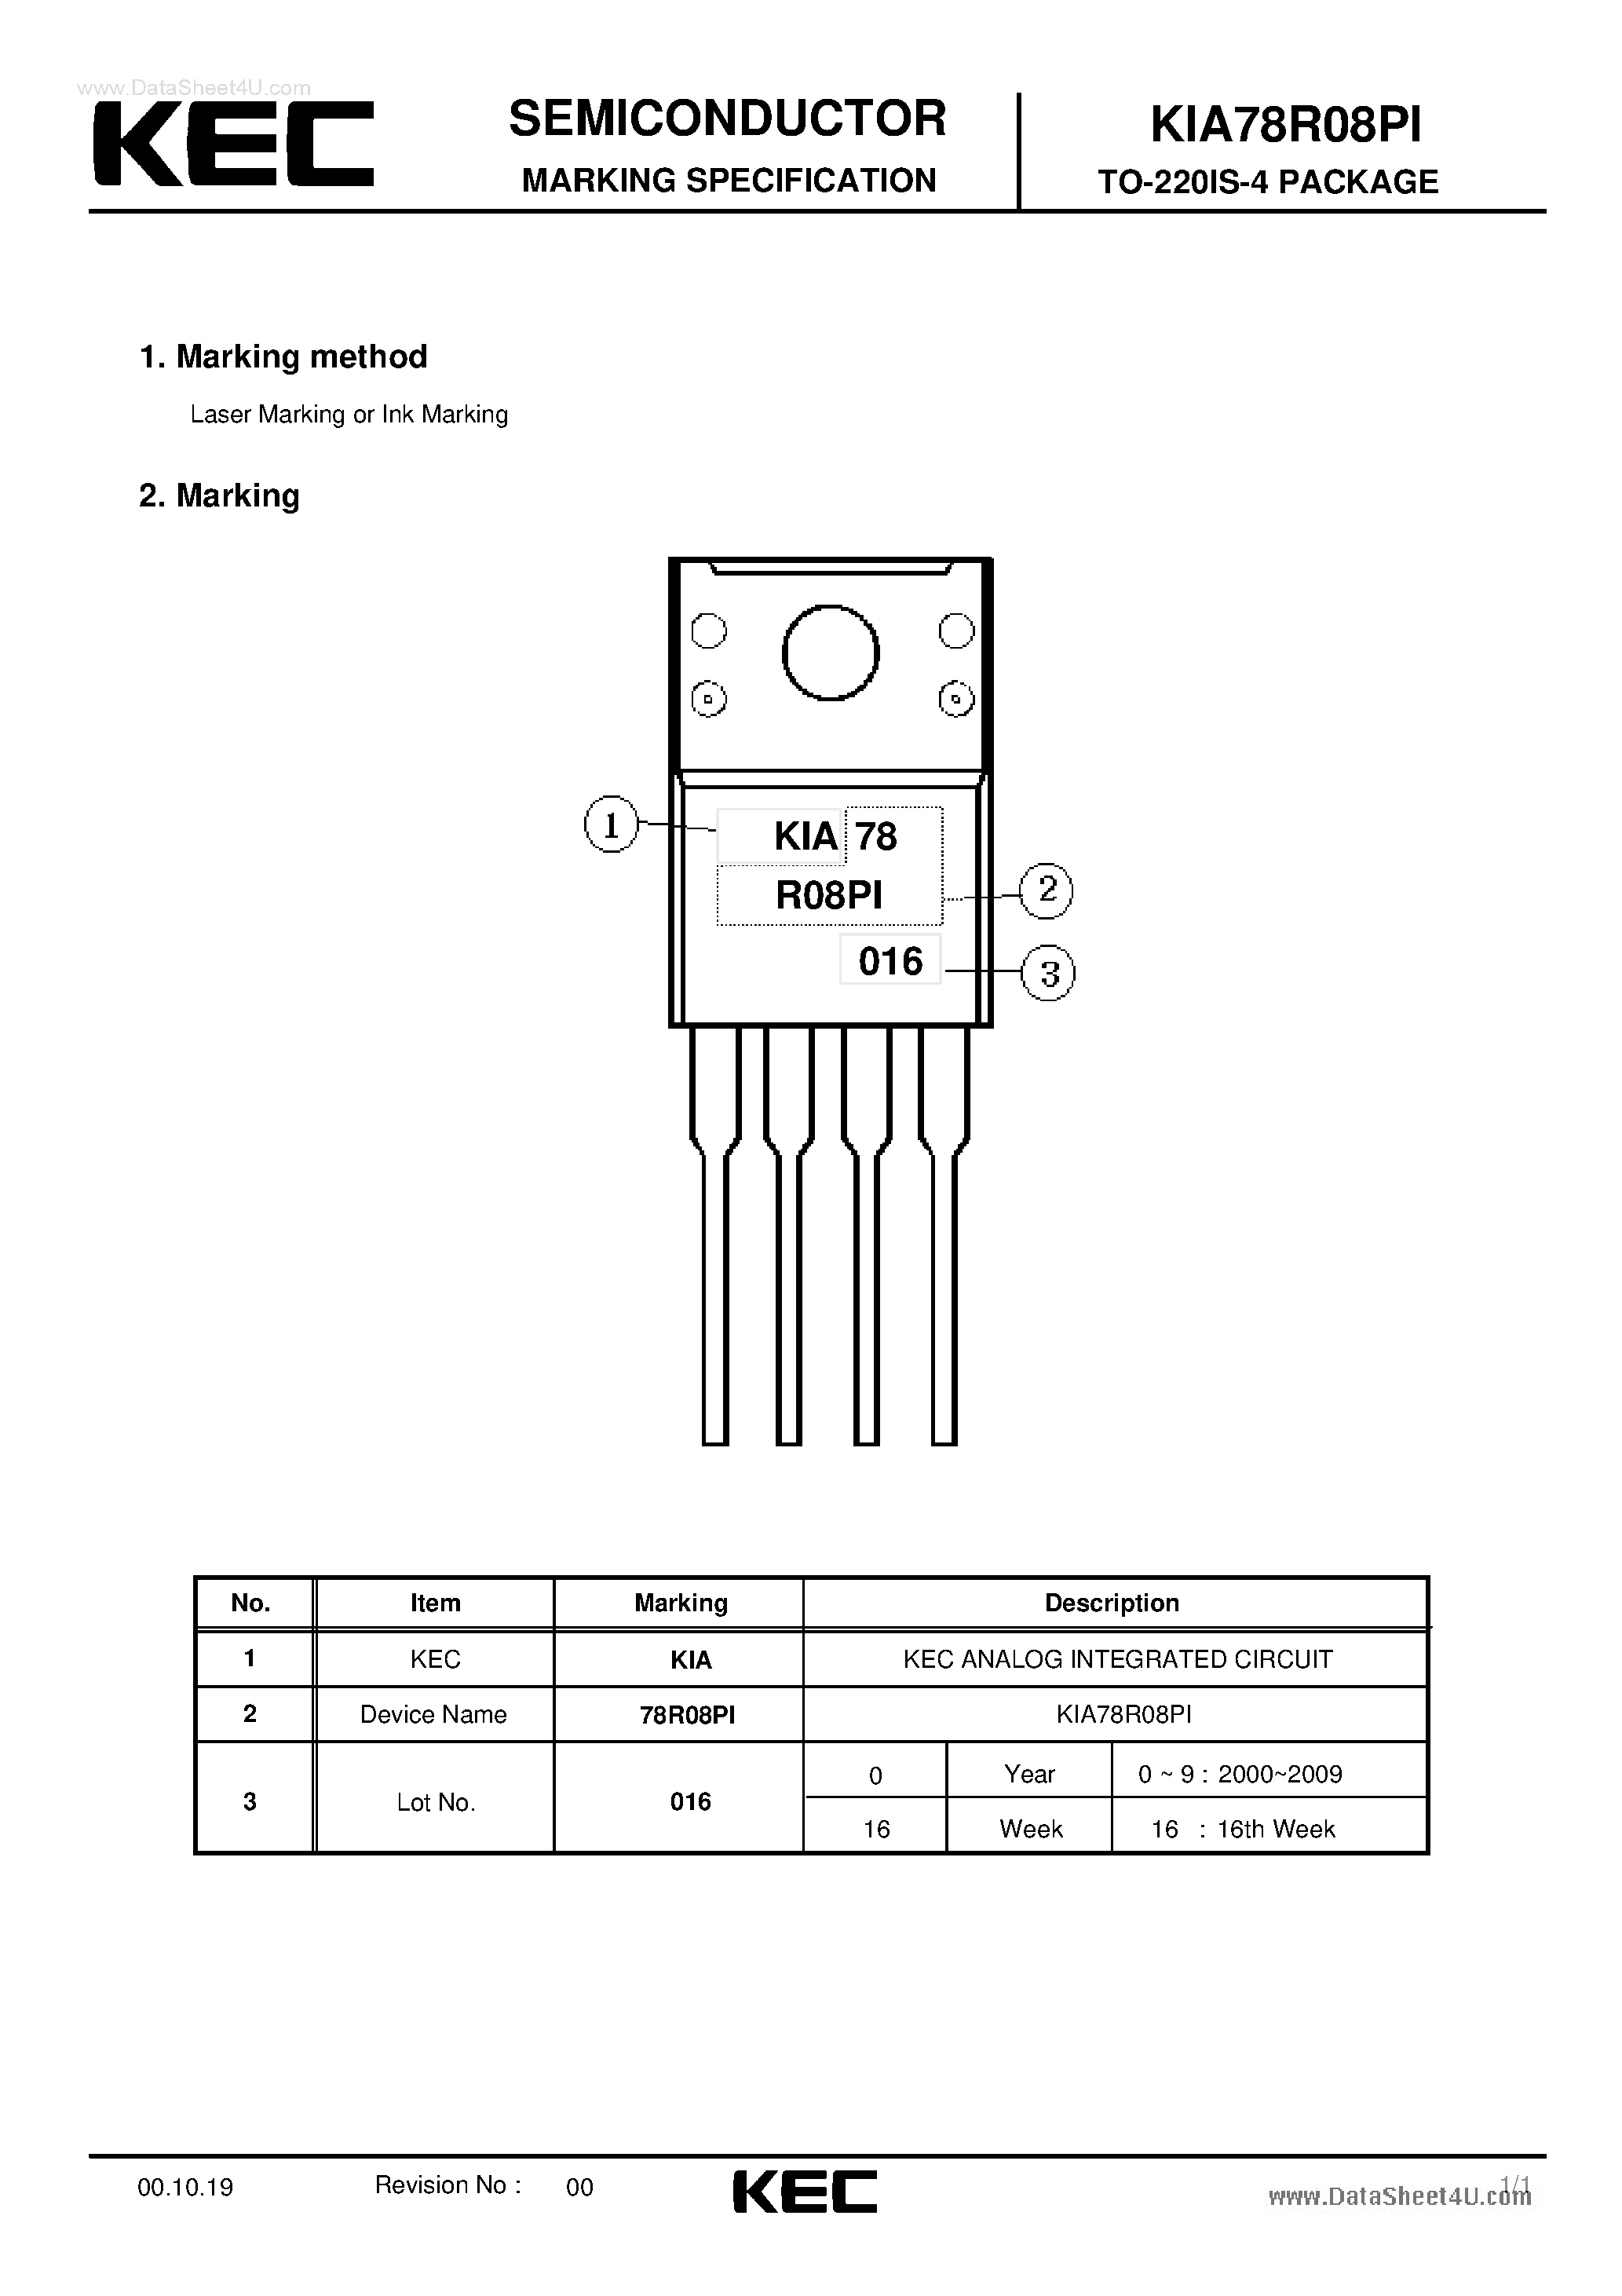 Datasheet KIA78R08PI - PACKAGE TO-220IS-4 page 1